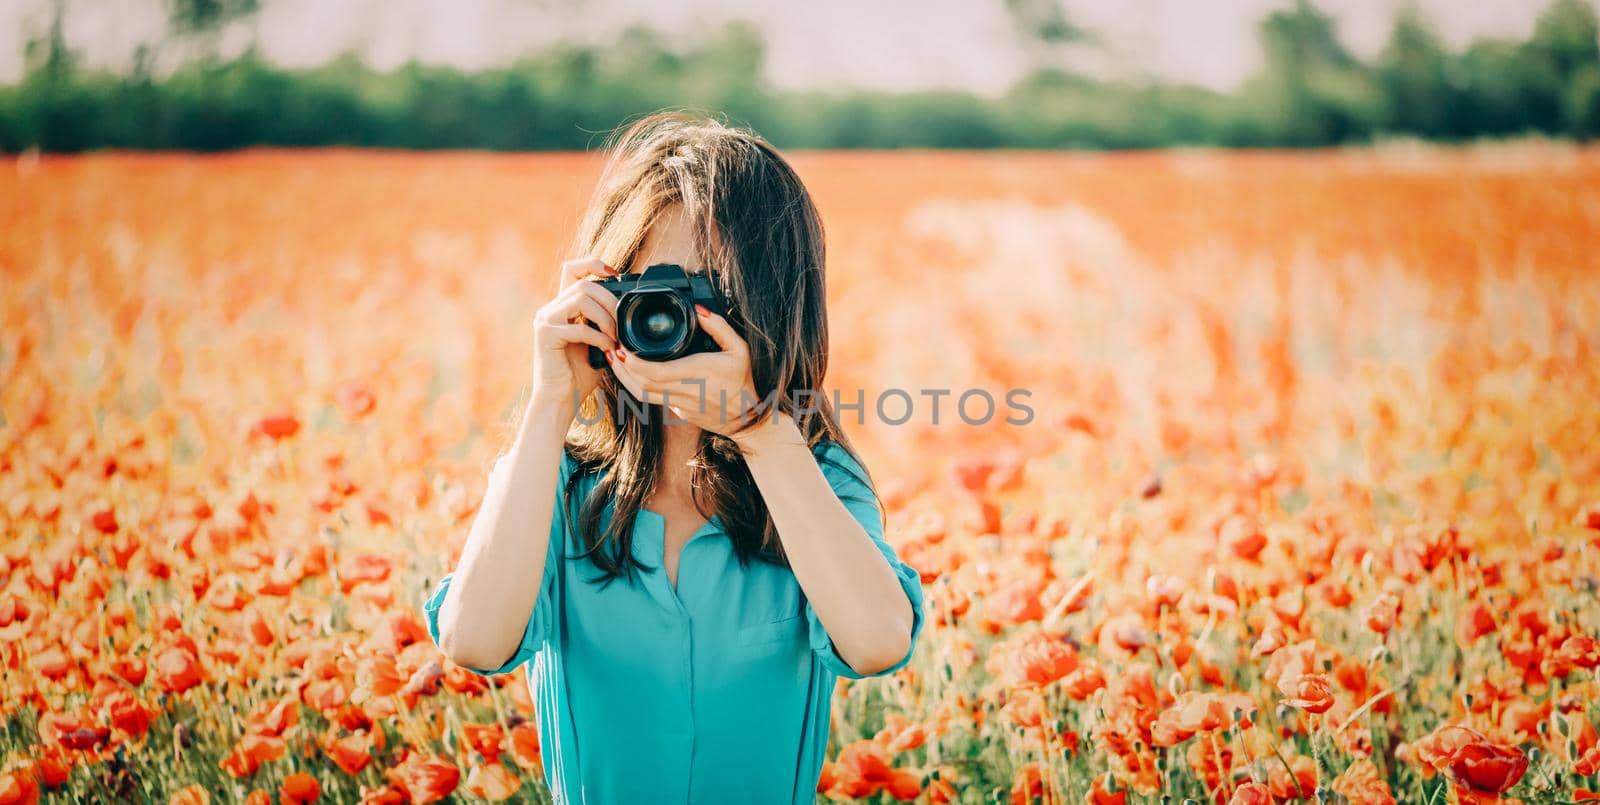 Young woman taking photographs with camera in poppies flower meadow in summer outdoor.